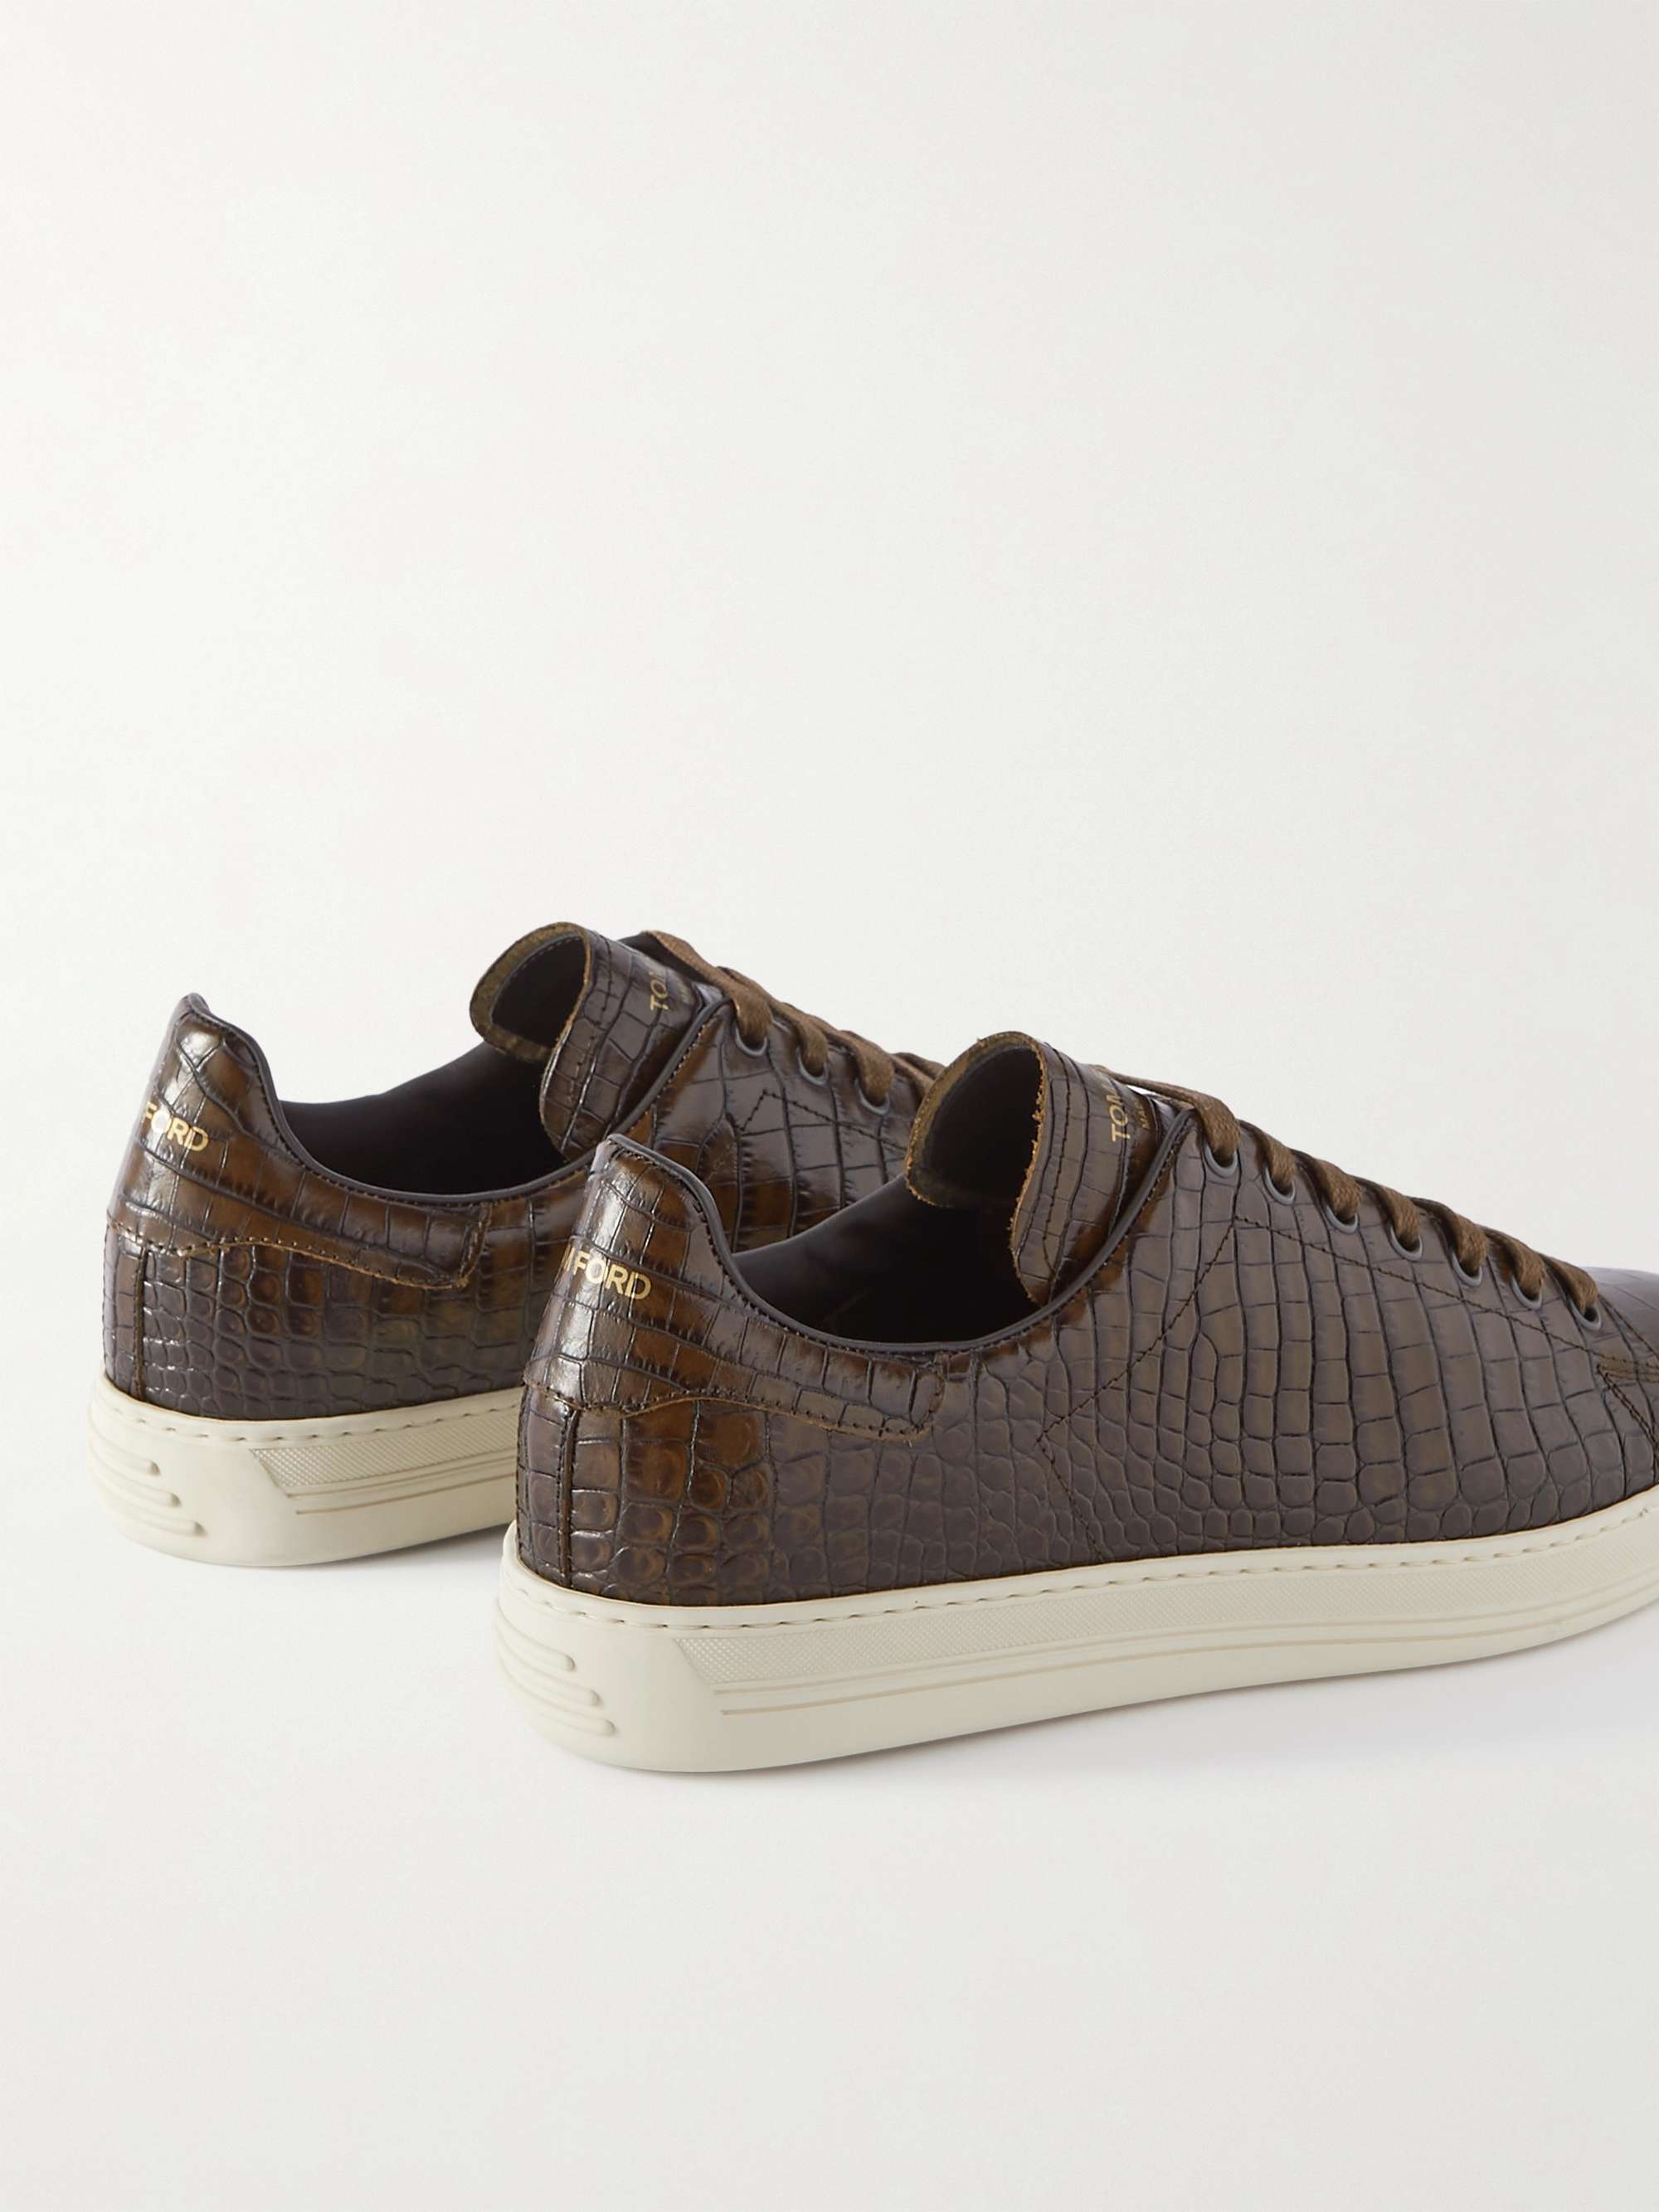 TOM FORD Warwick Croc-Effect Leather Sneakers